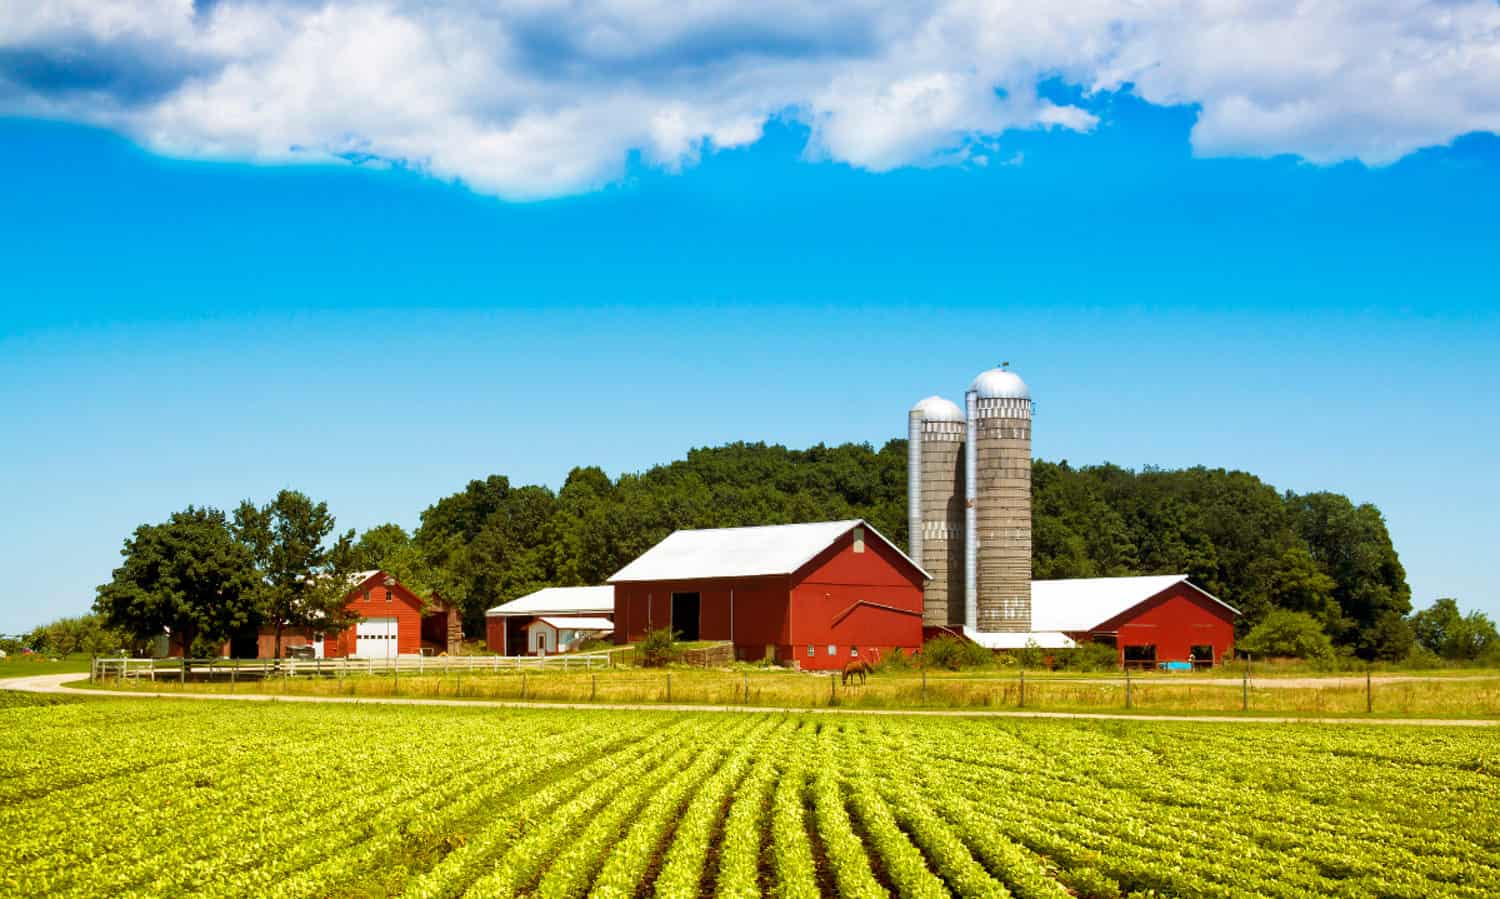 The Farm Bill is a massive, omnibus piece of legislation that dictates US$87 billion a year towards the nation’s food and farming policies. Congress must ensure that this year's Farm Bill builds a sustainable and healthy future for all. 